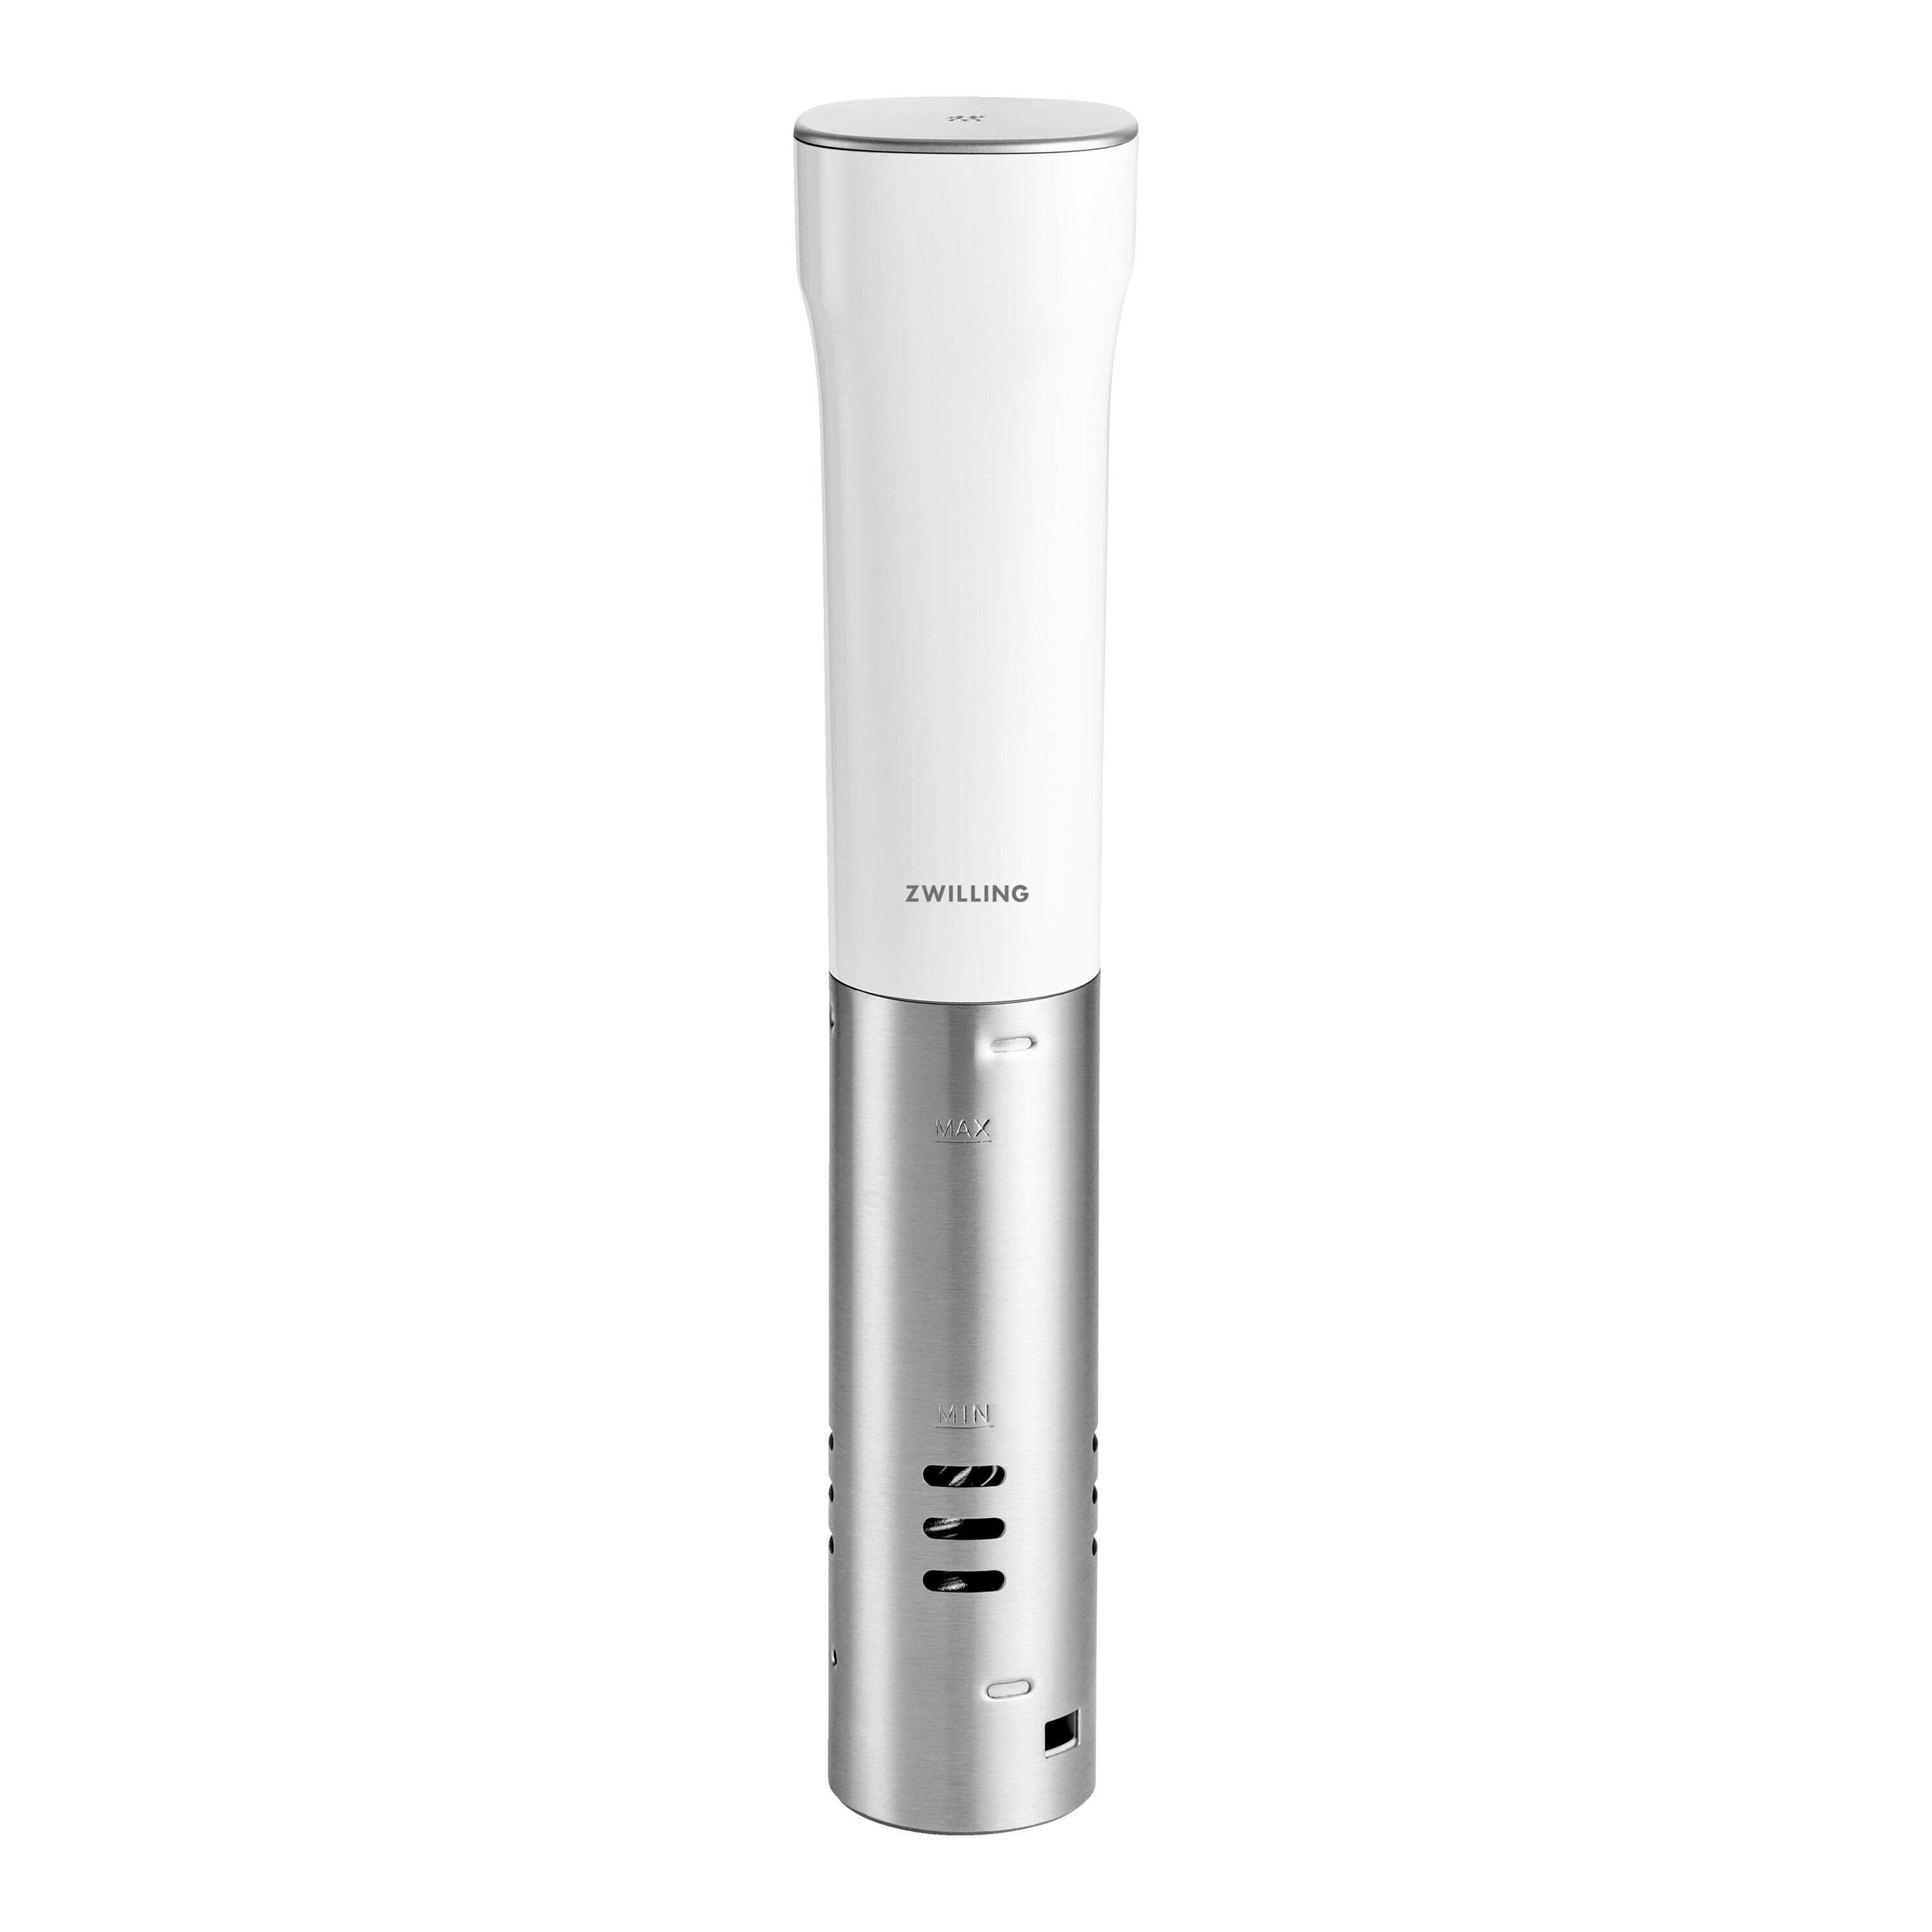 ZWILLING Enfinigy Sous Vide Stick, White or Black on Food52